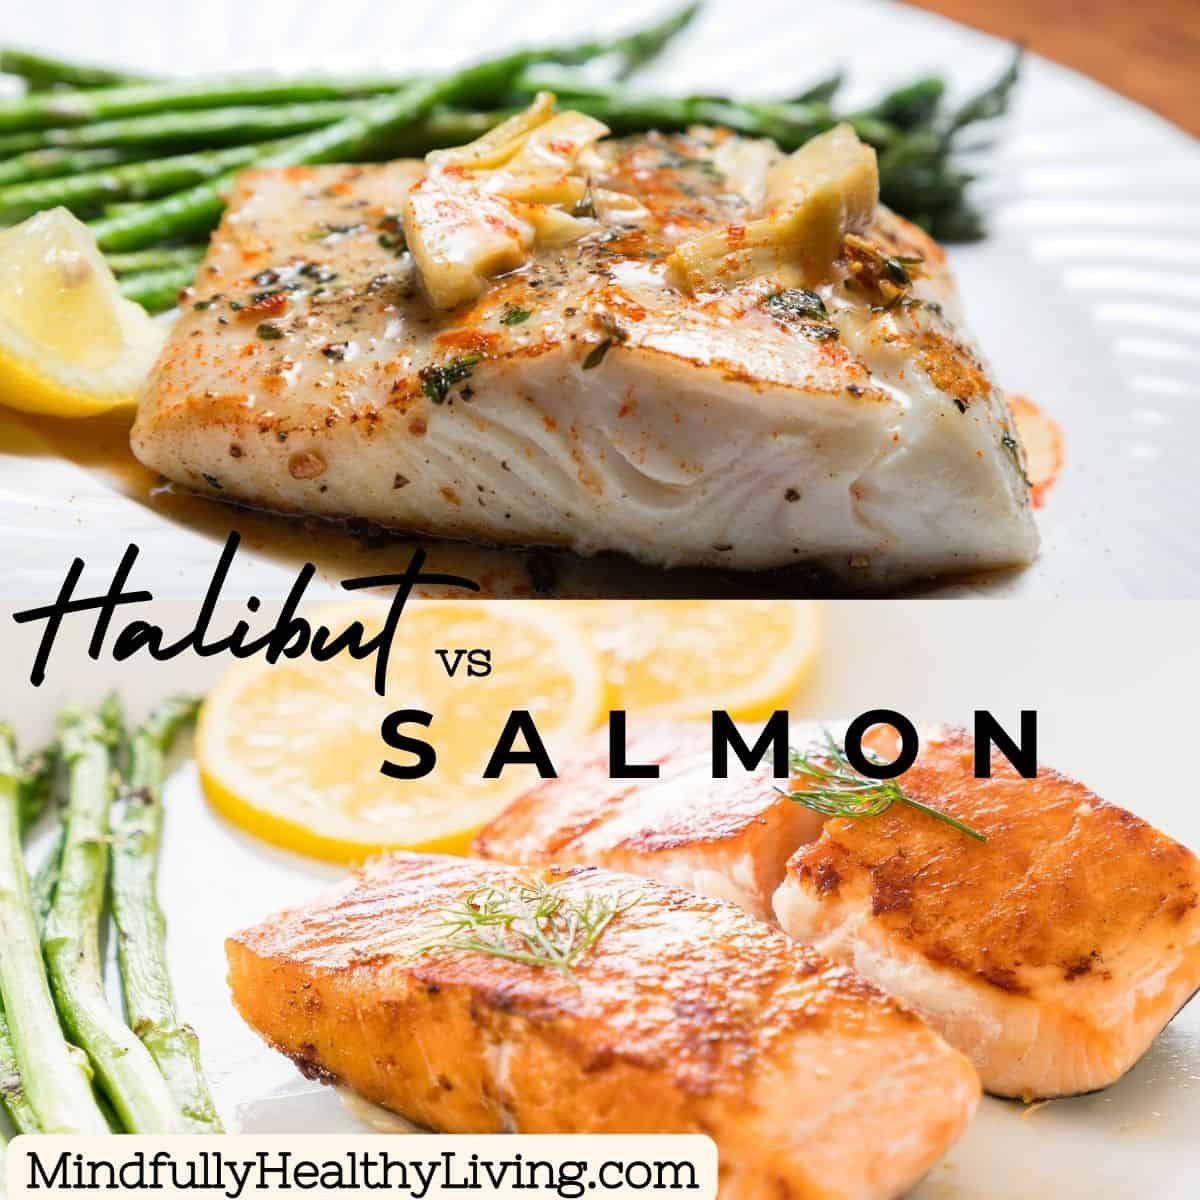 A Photo of a deliciously cooked Alaska Halibut fillet perfectly seasoned next to asparagus and the bottom photo is cooked Alaskan Sockeye Salmon fillets next to lemons and asparagus topped with a dill leaf. In the text overlay reads Halibut vs Salmon MindfullyHealthyLiving.com